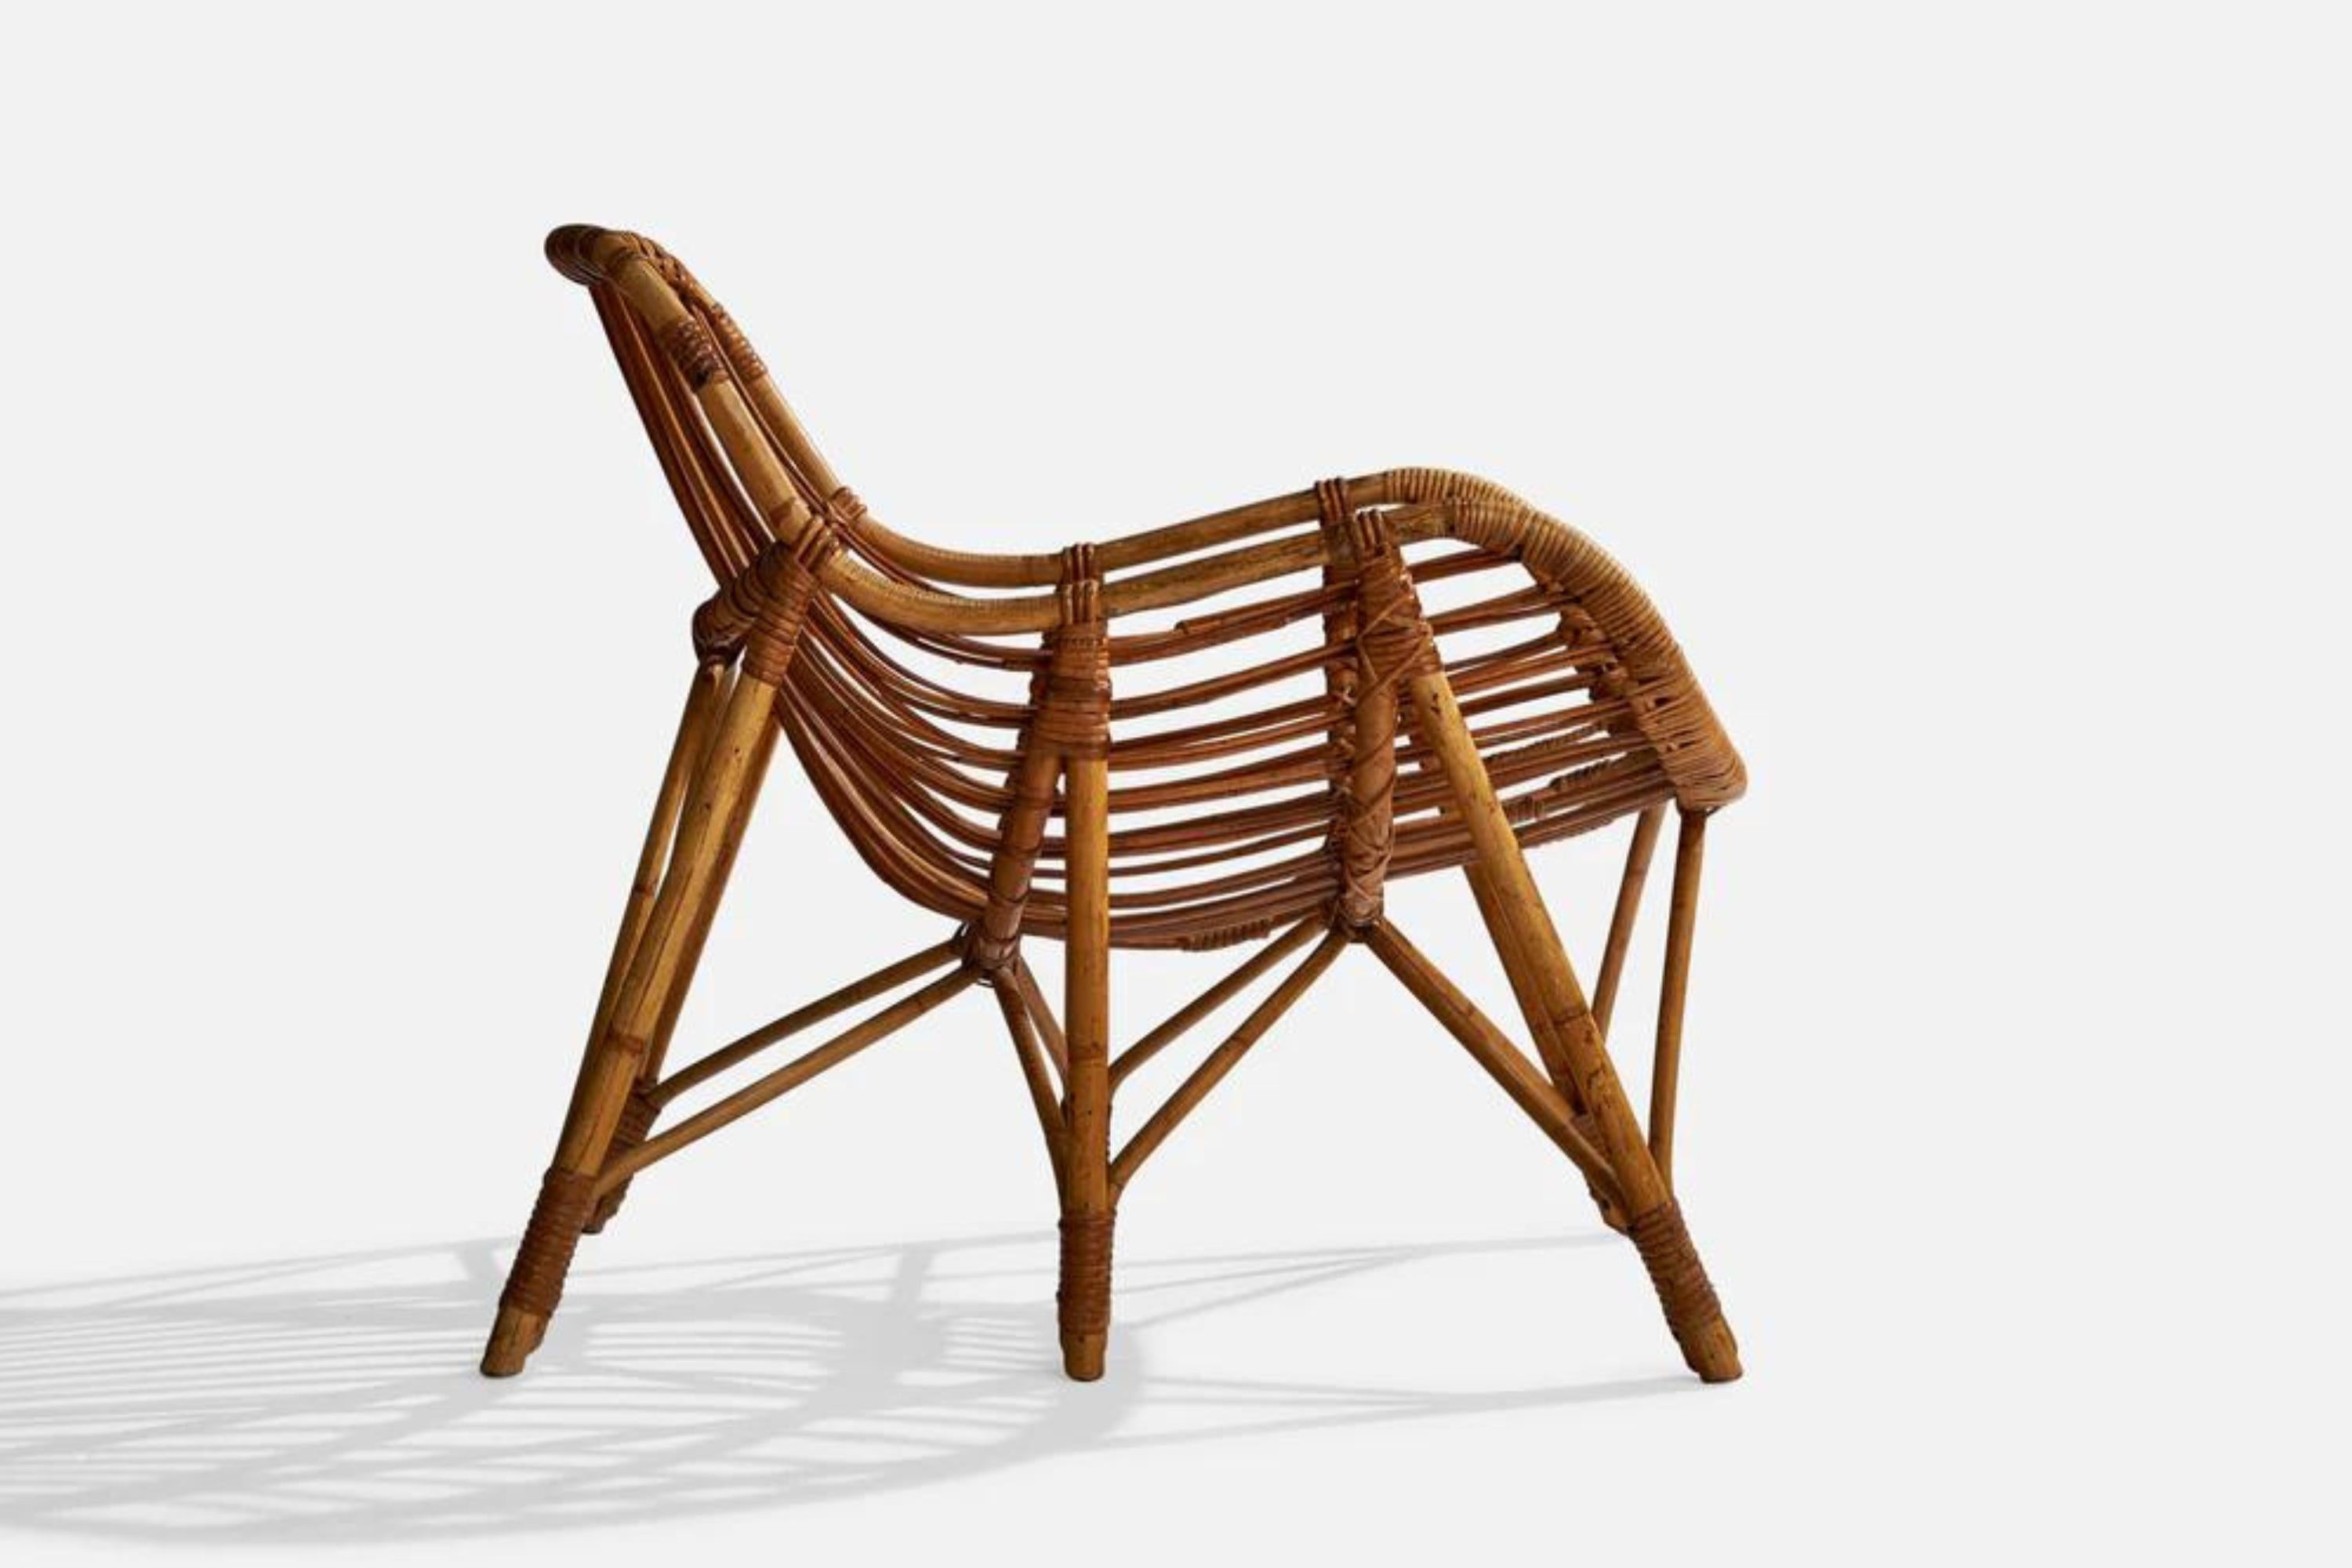 A moulded bamboo and rattan lounge chair designed and produced in Finland, 1940s.

Seat height 14.25